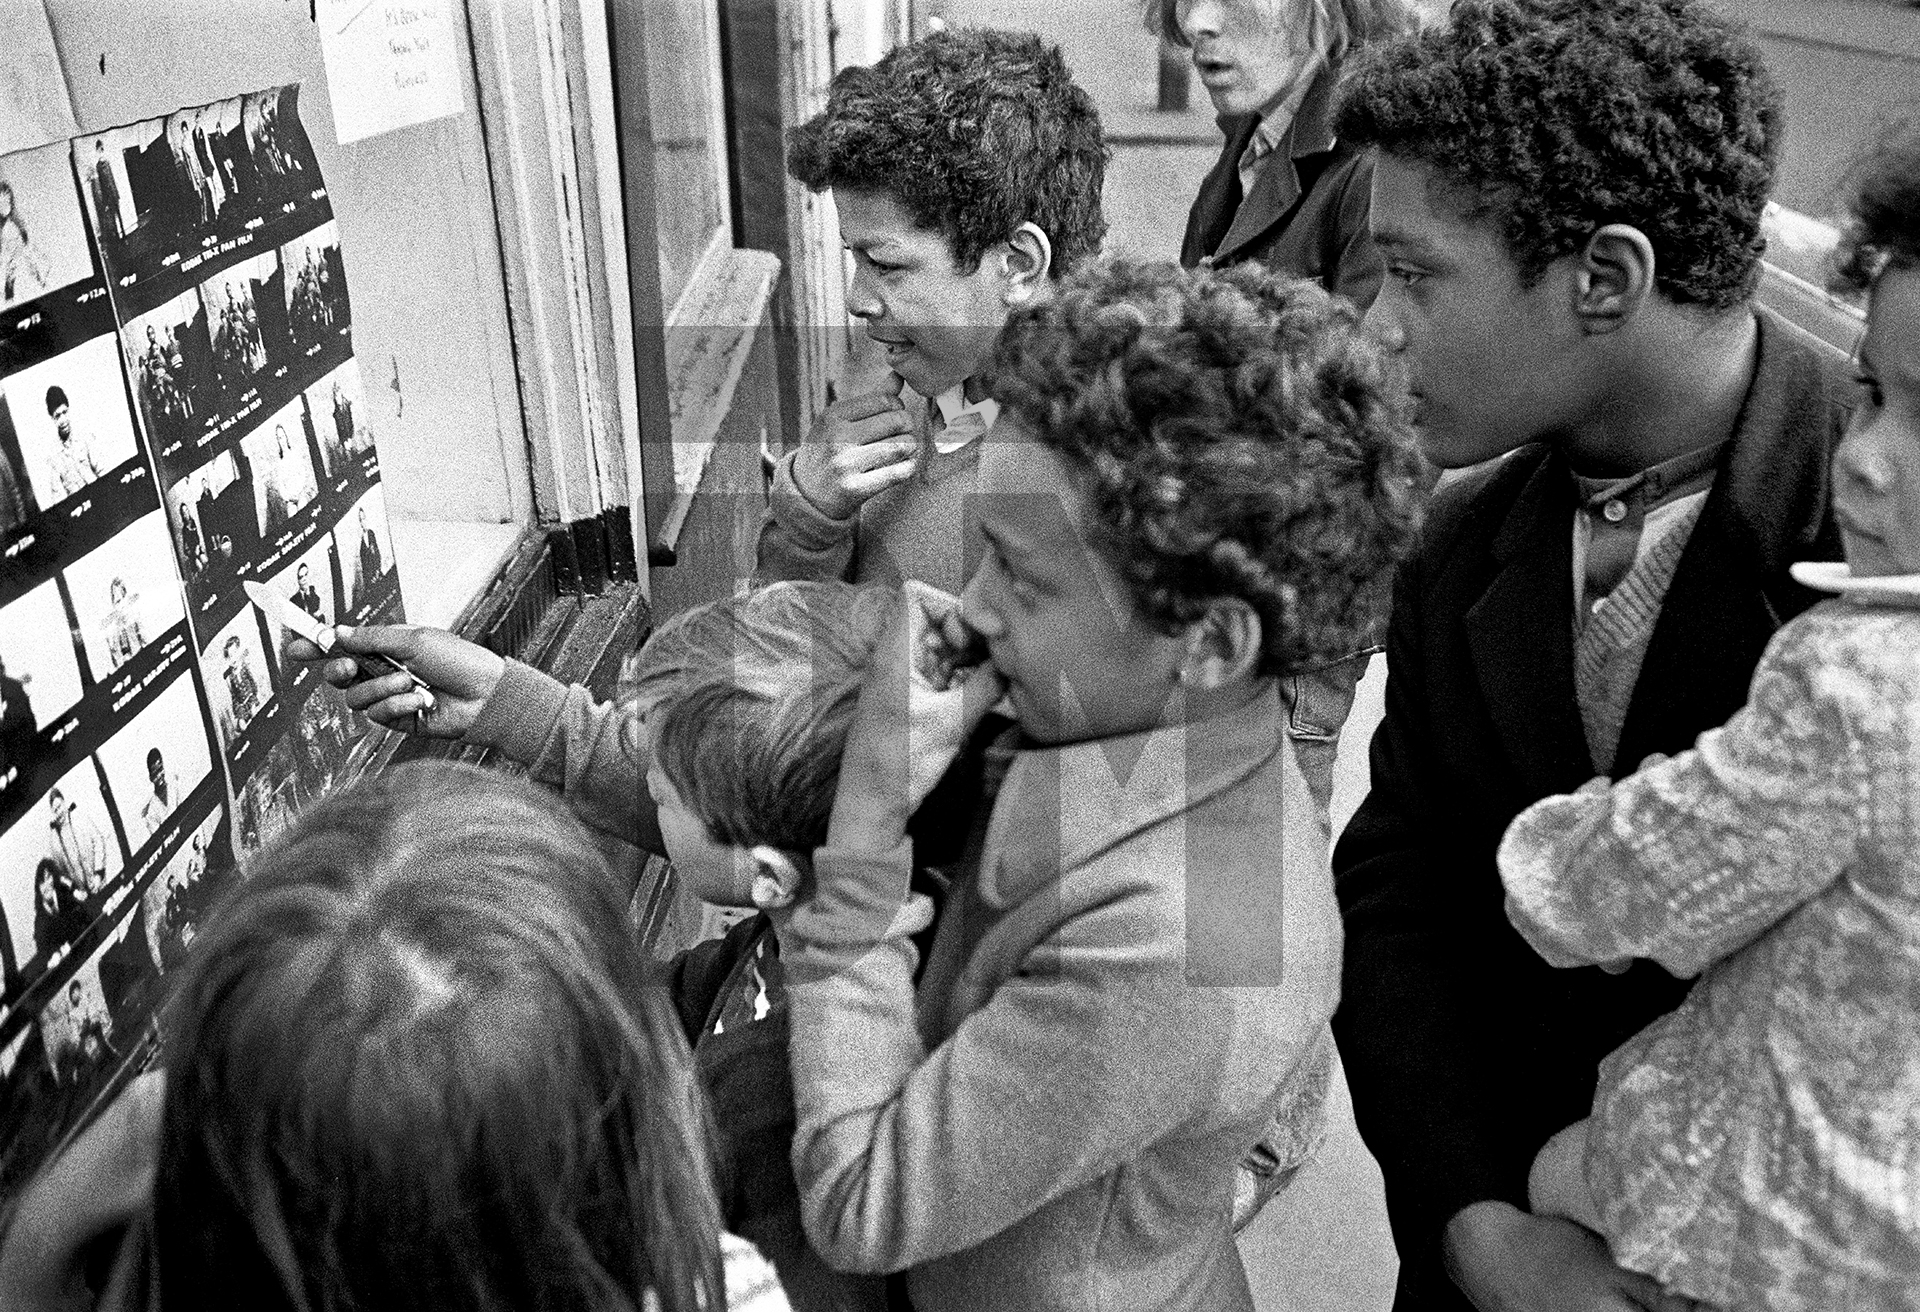 Looking at pictures in the window of The Shop on Greame Street, Moss Side, Manchester. February-April 1972 by Daniel Meadows